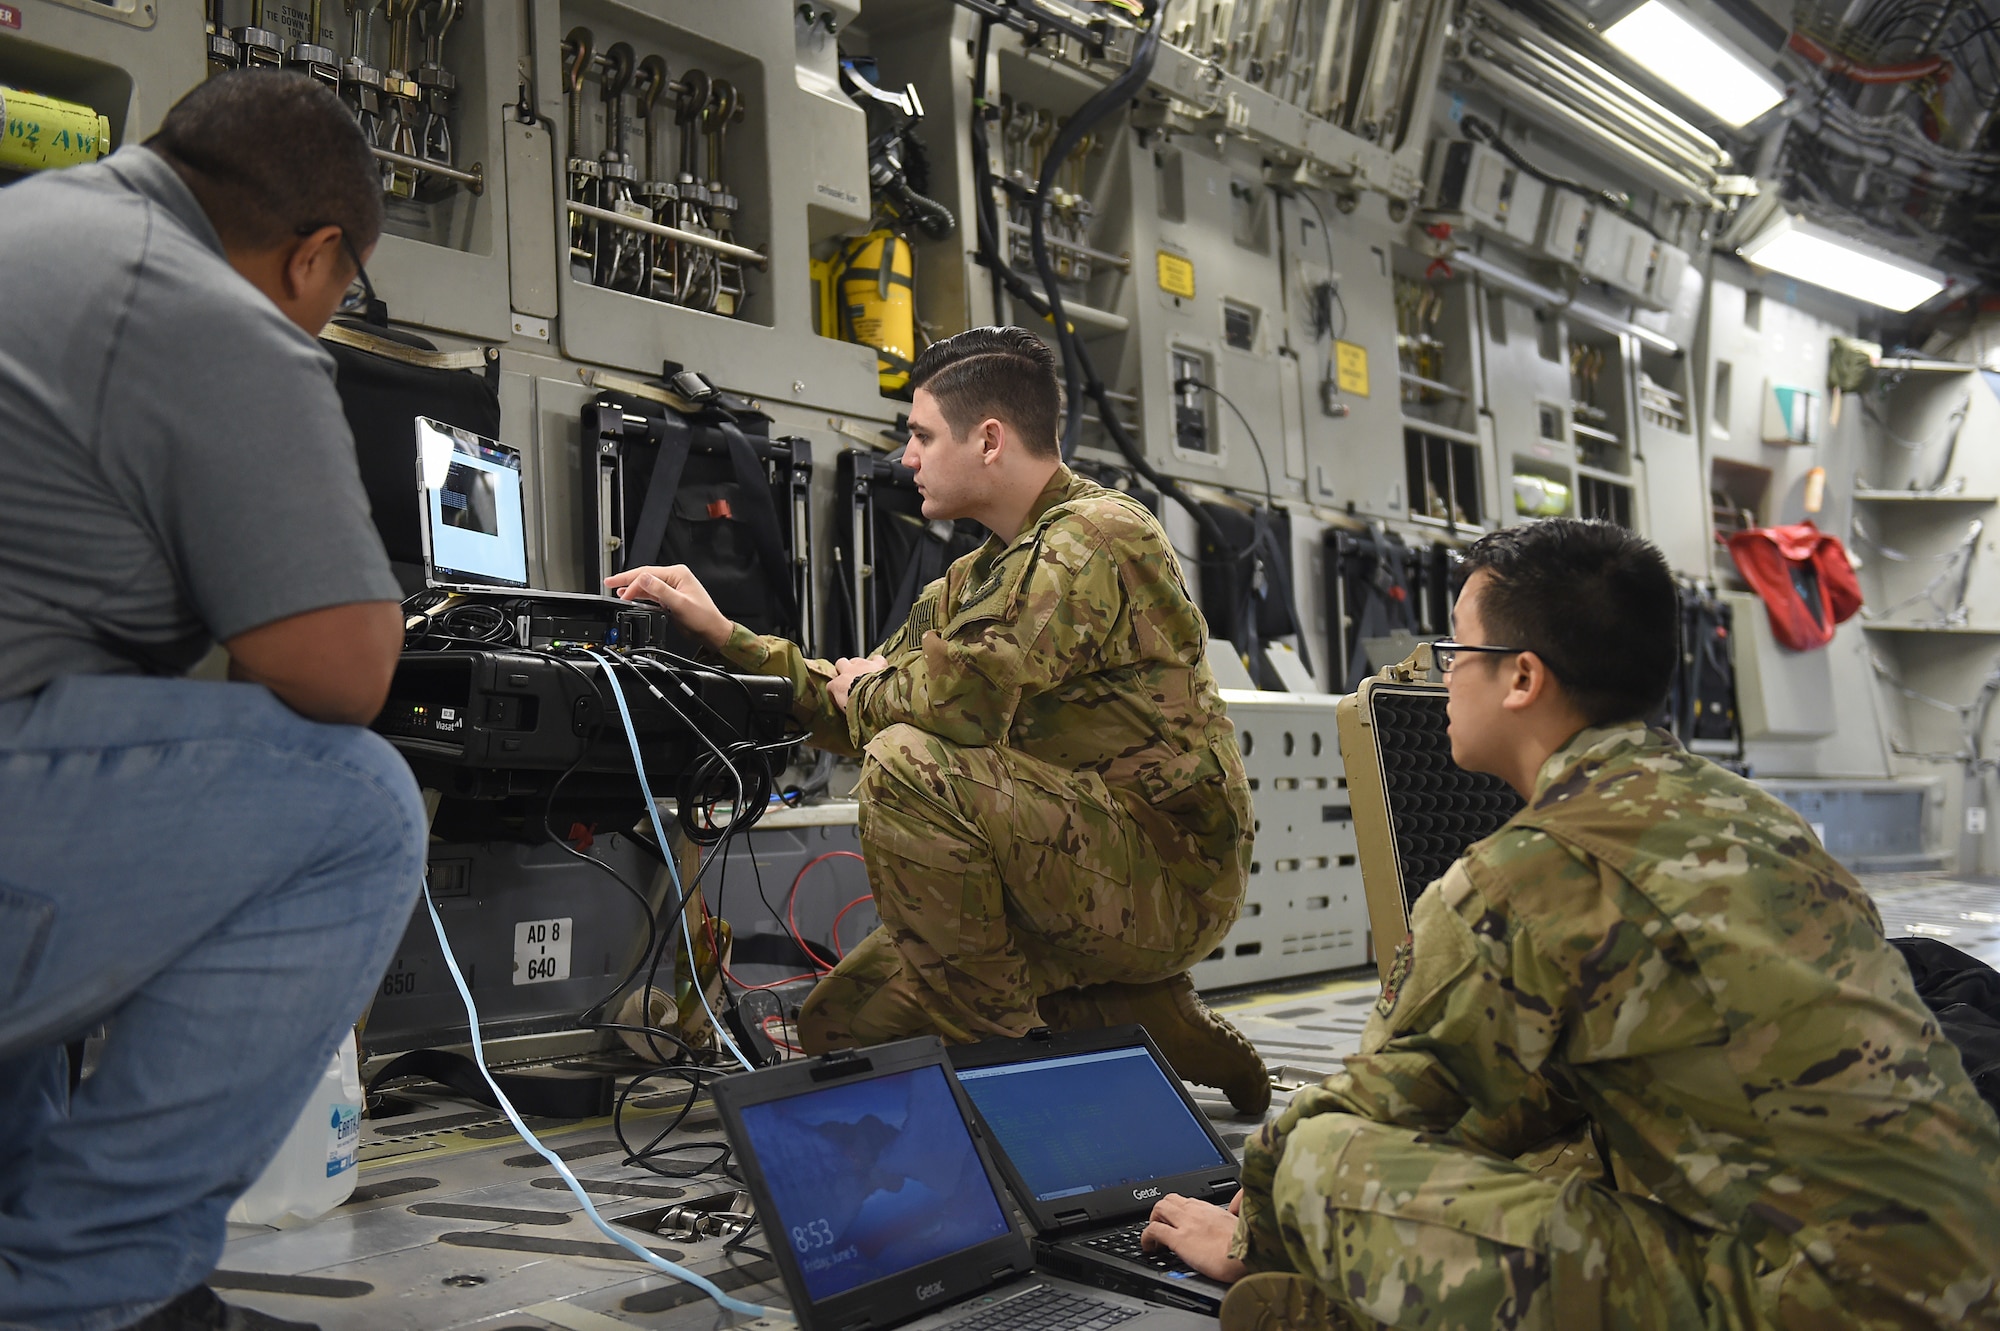 From left to right, Joseph Labosa, Department of Defense contractor, Staff Sgt. Mehmet Yasdiman, 1st Airlift Squadron communications systems operator, and Staff Sgt. Richie Sounantha, Air Mobility Command cyber transport systems technician, test a fixed installation satellite antenna (FISA) connection onboard a C-17 Globemaster III on Joint Base Lewis-McChord, Wash., June 5, 2020. The FISA was set up to work with a dynamic re-tasking capability (DRC) system, enabling higher connection speeds and more efficient communication between the aircraft and the ground. (U.S. Air Force photo by Airman 1st Class Mikayla Heineck)